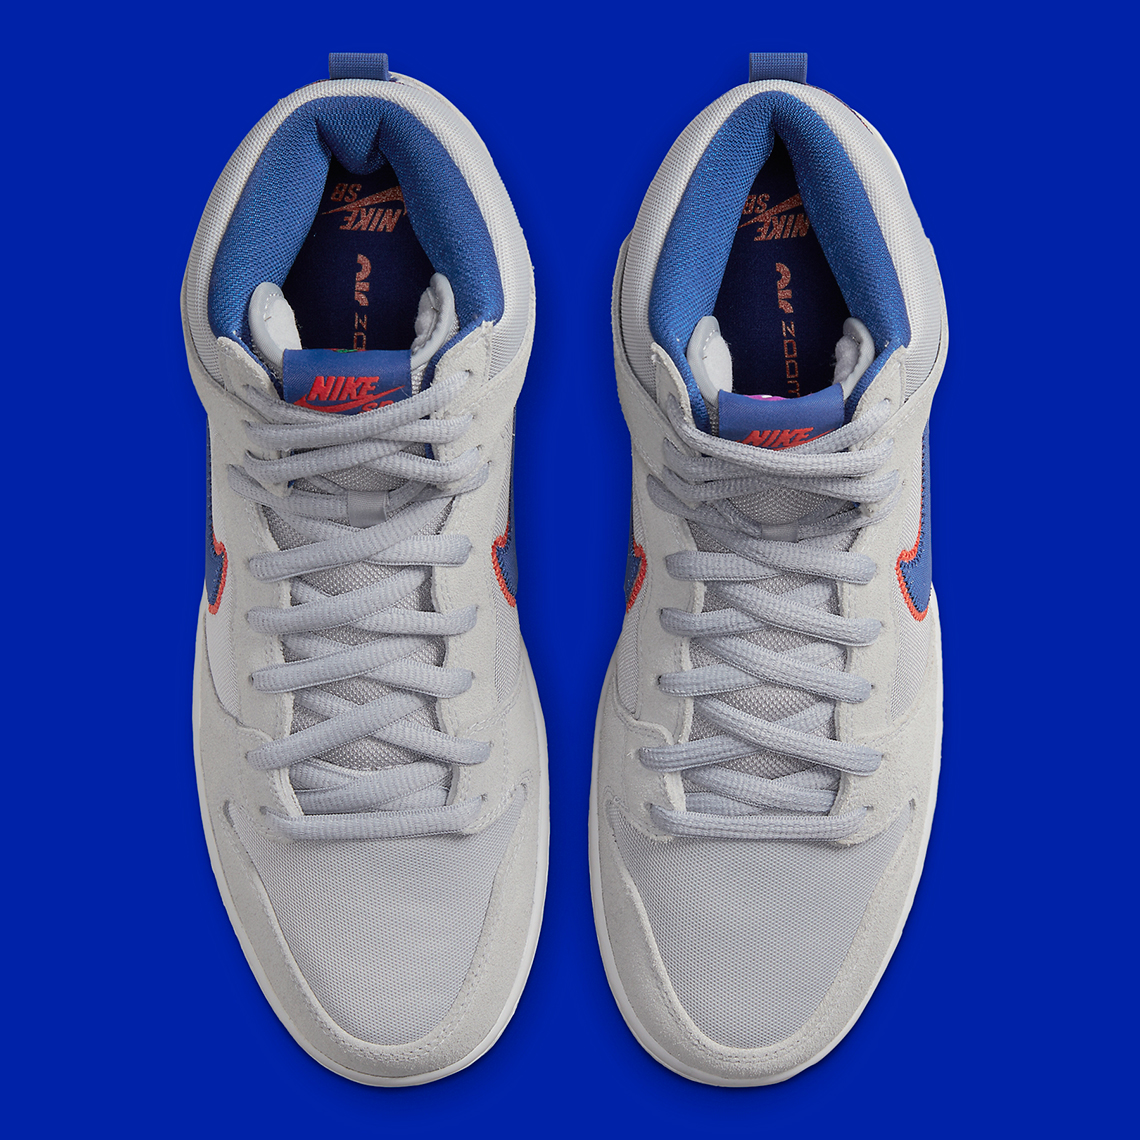 Nike Sb Dunk High Mets Dh7155 001 Release Date 1